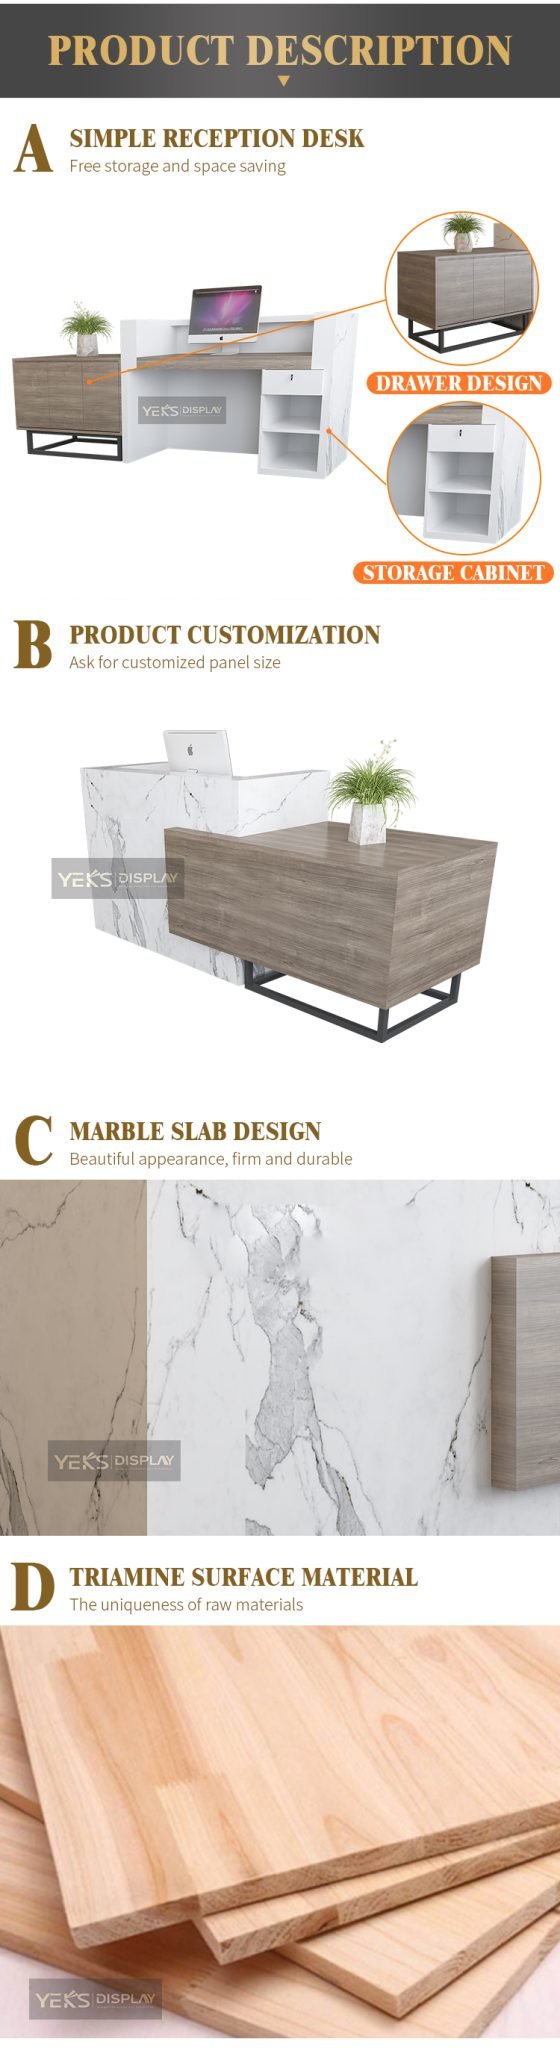 White reception desk with wooden cabinets